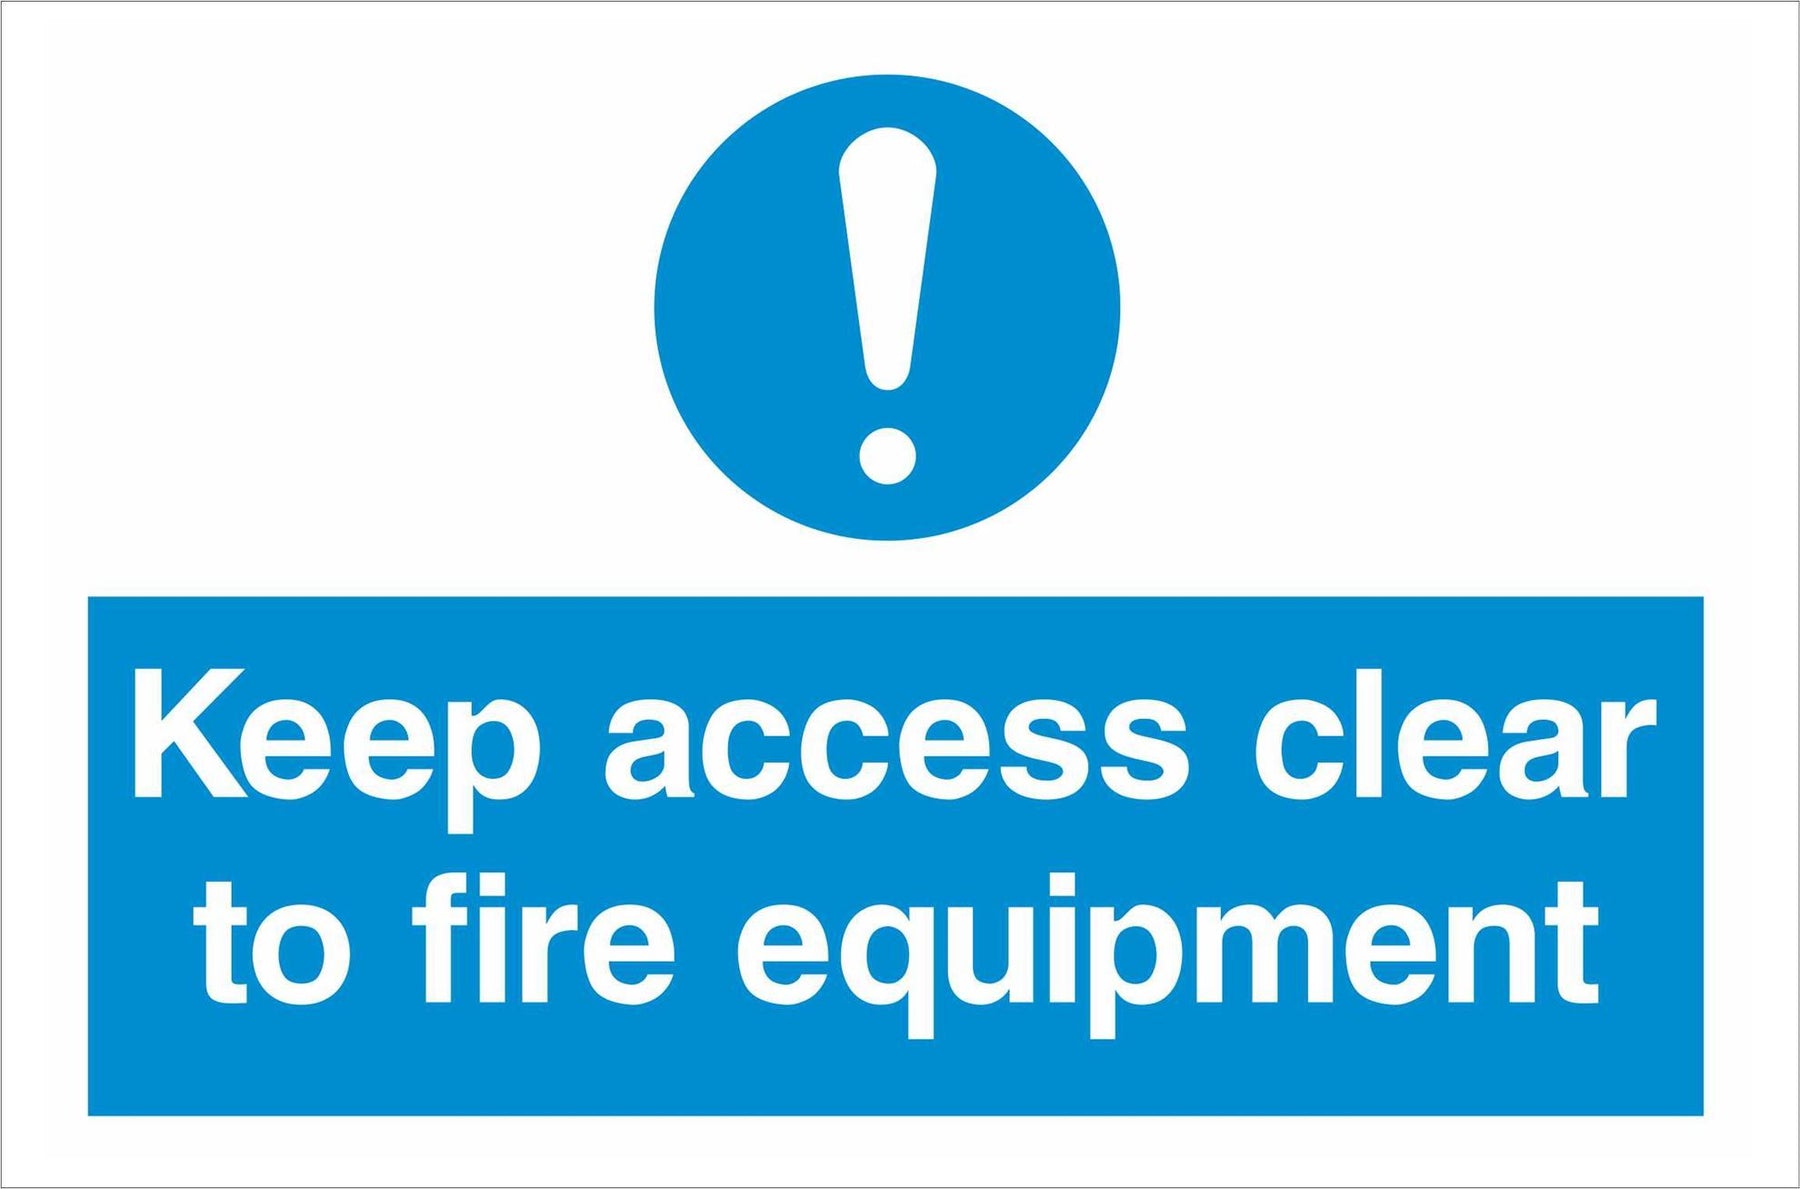 Keep access clear to fire equipment